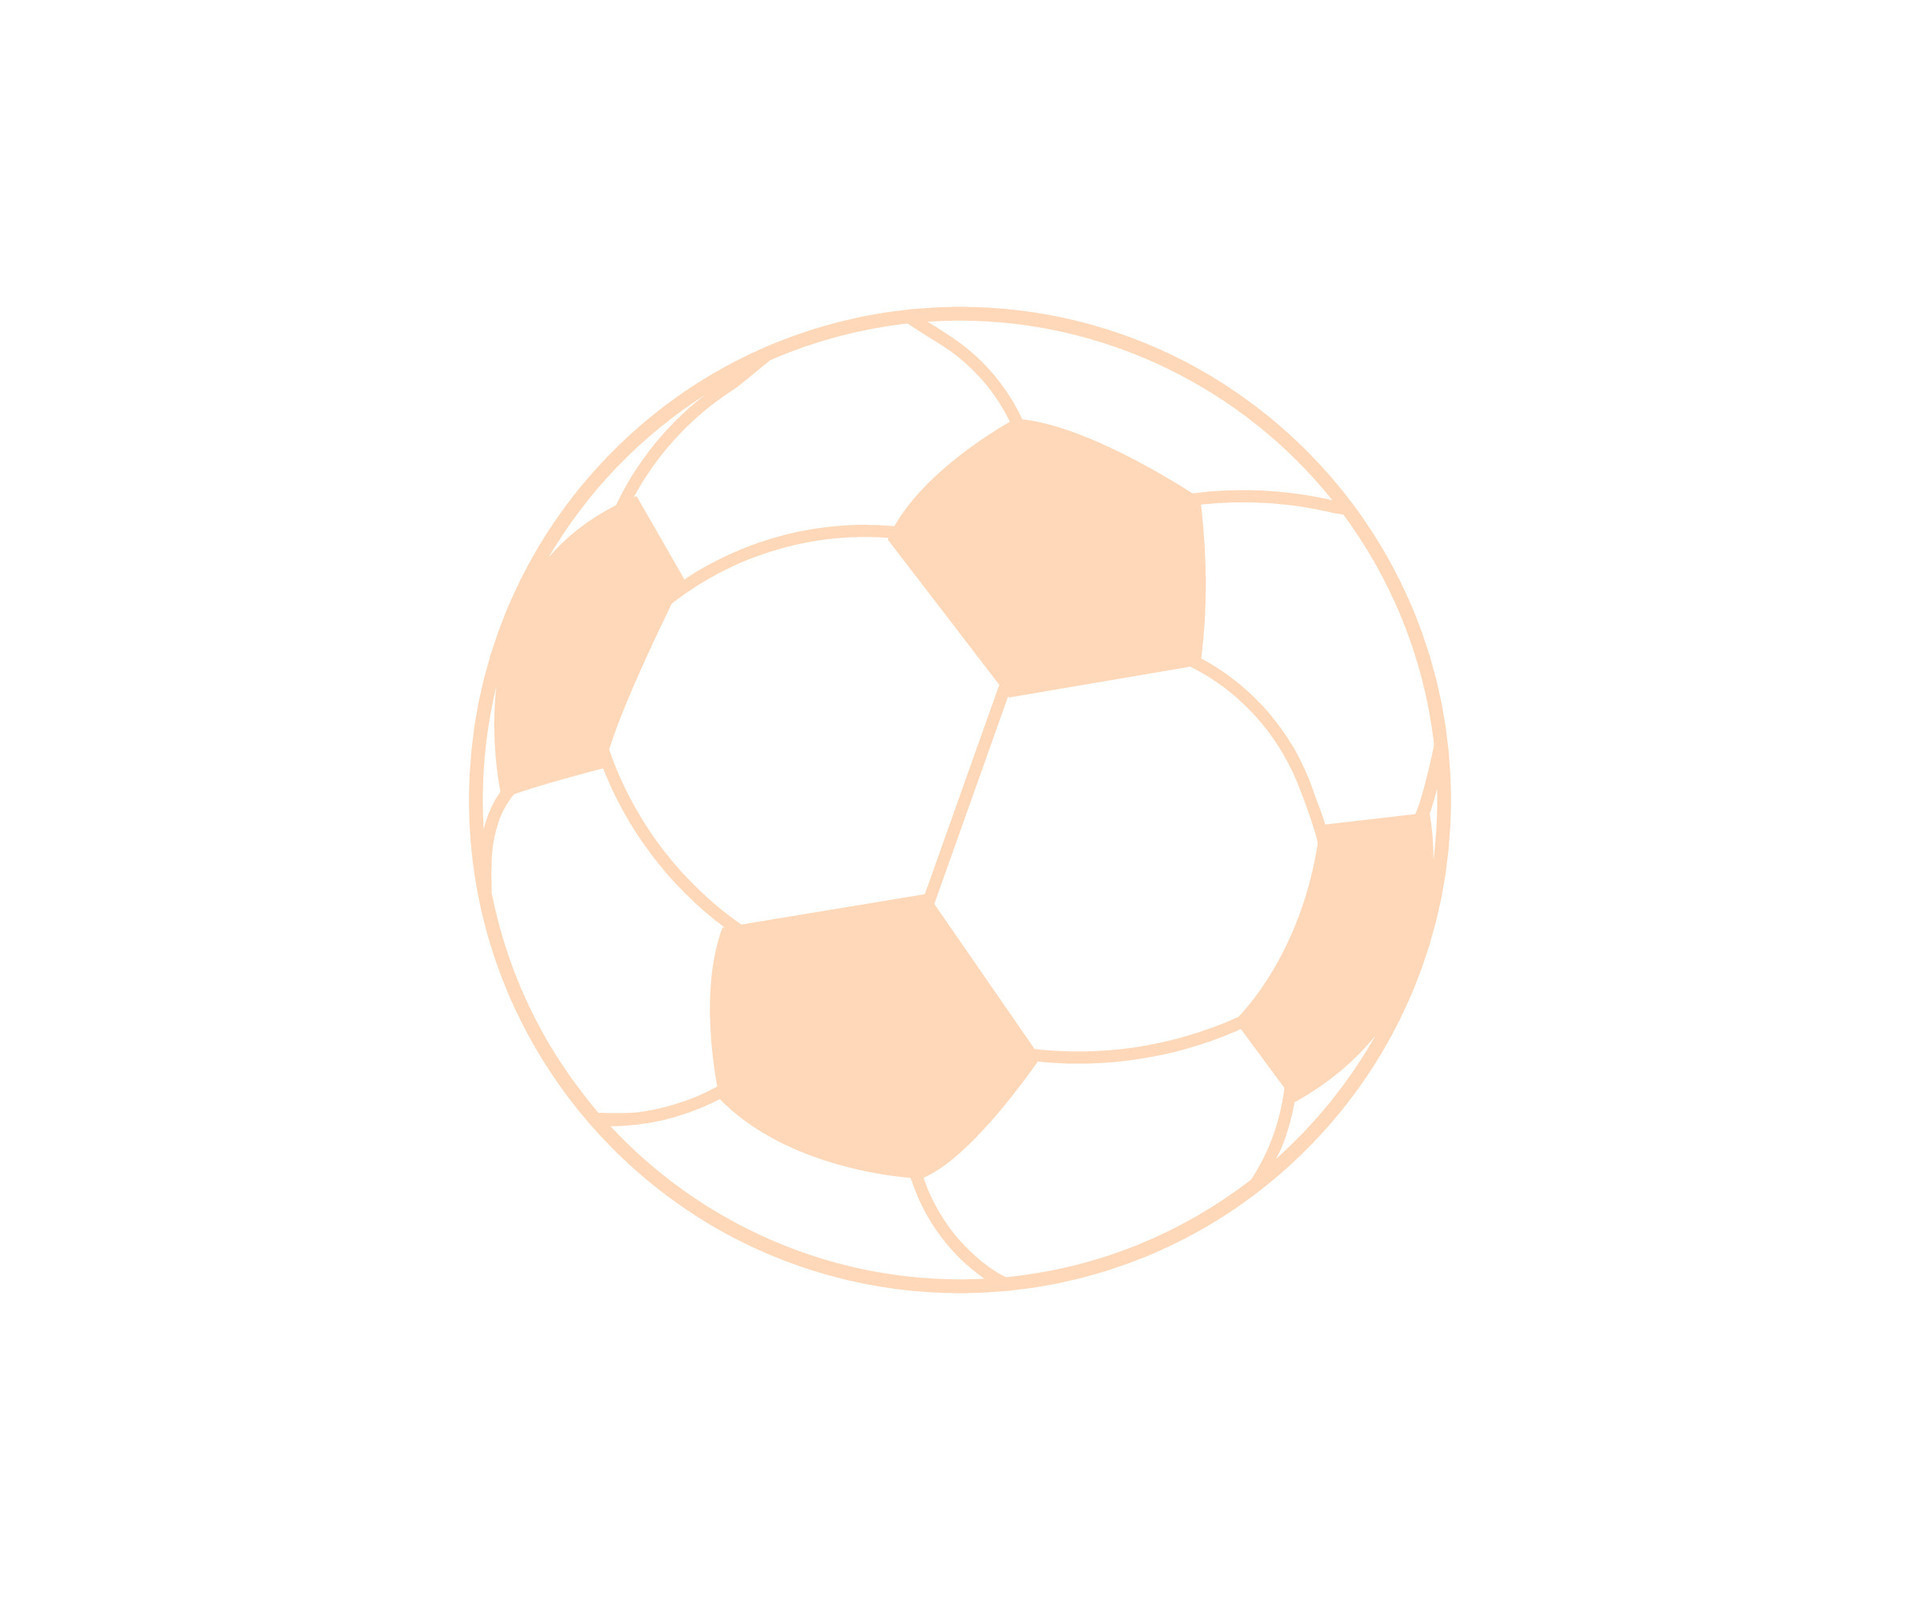 https://static.vecteezy.com/system/resources/previews/028/547/857/original/peach-football-line-art-drawing-art-icons-and-graphics-coloring-page-for-kids-free-vector.jpg